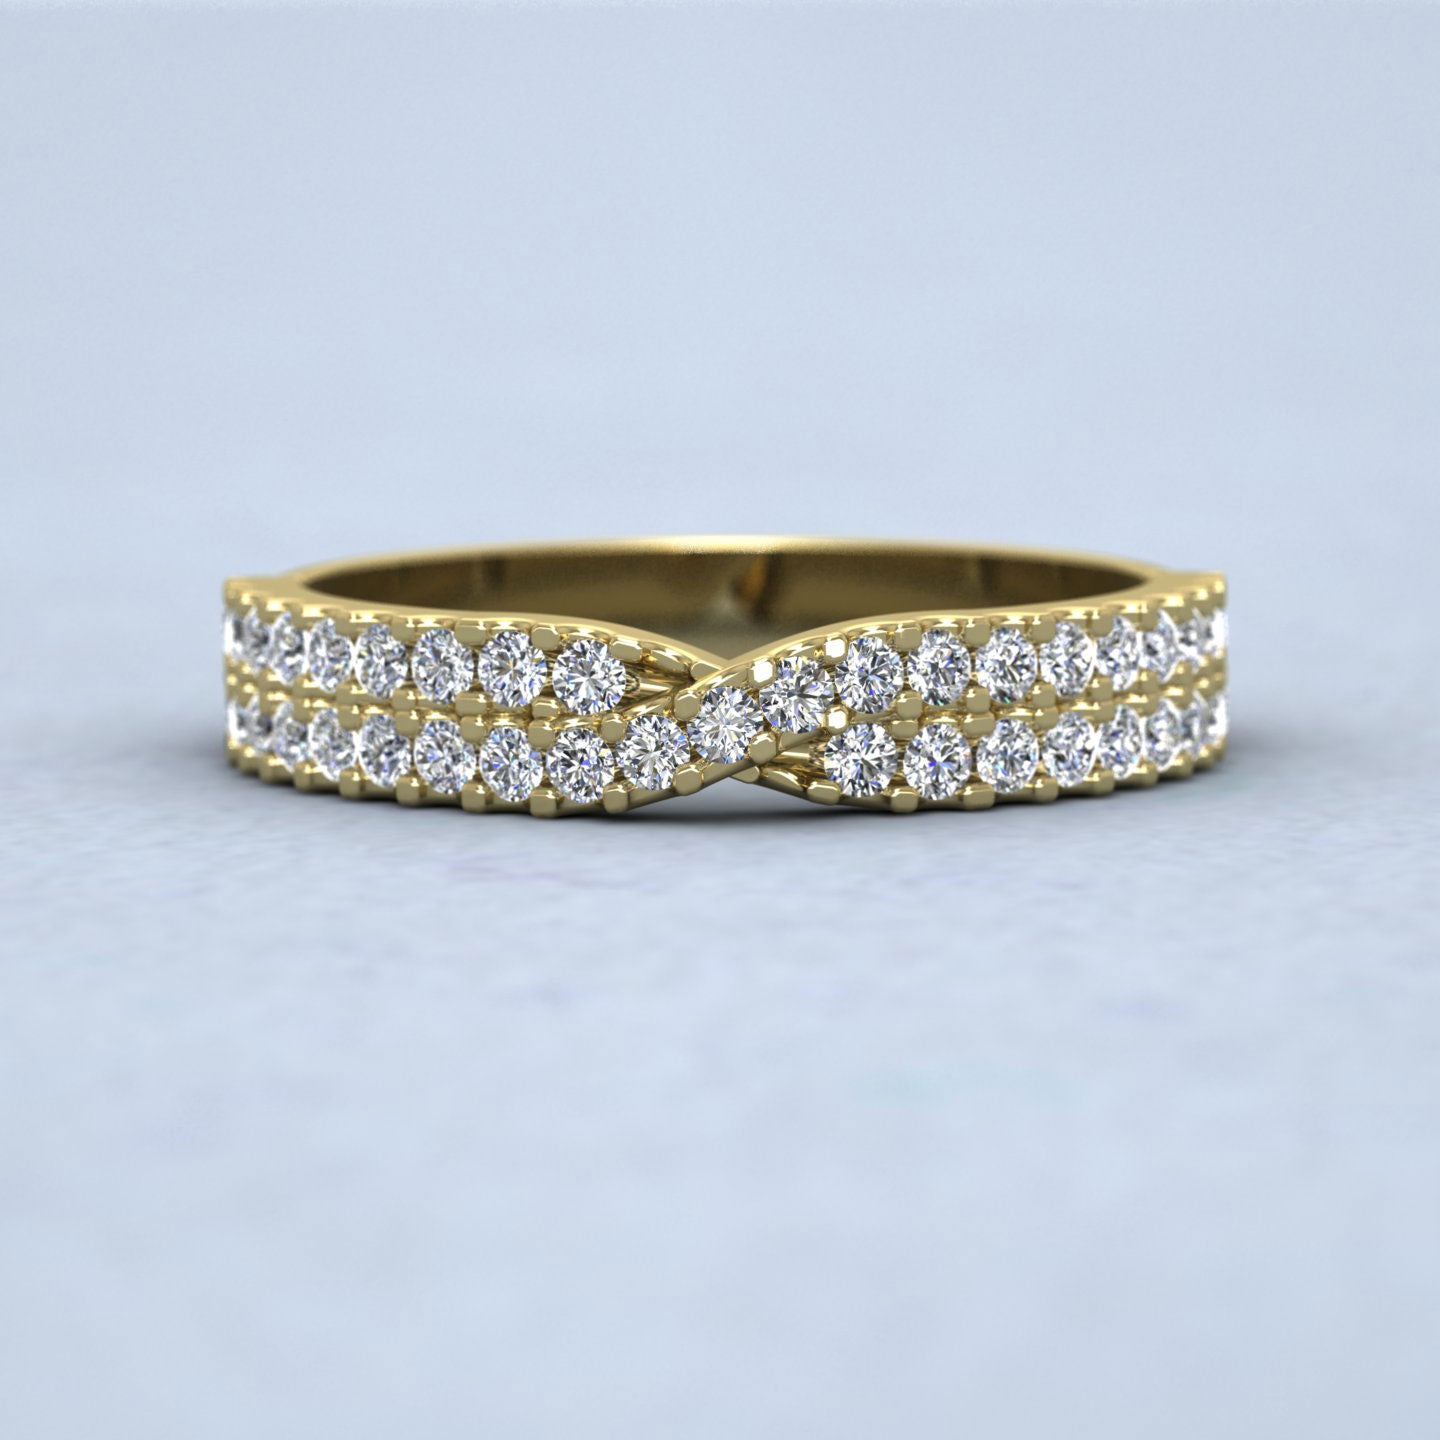 Crossover Diamond Claw Set Wedding Ring In 18ct Yellow Gold 3.5mm Wide